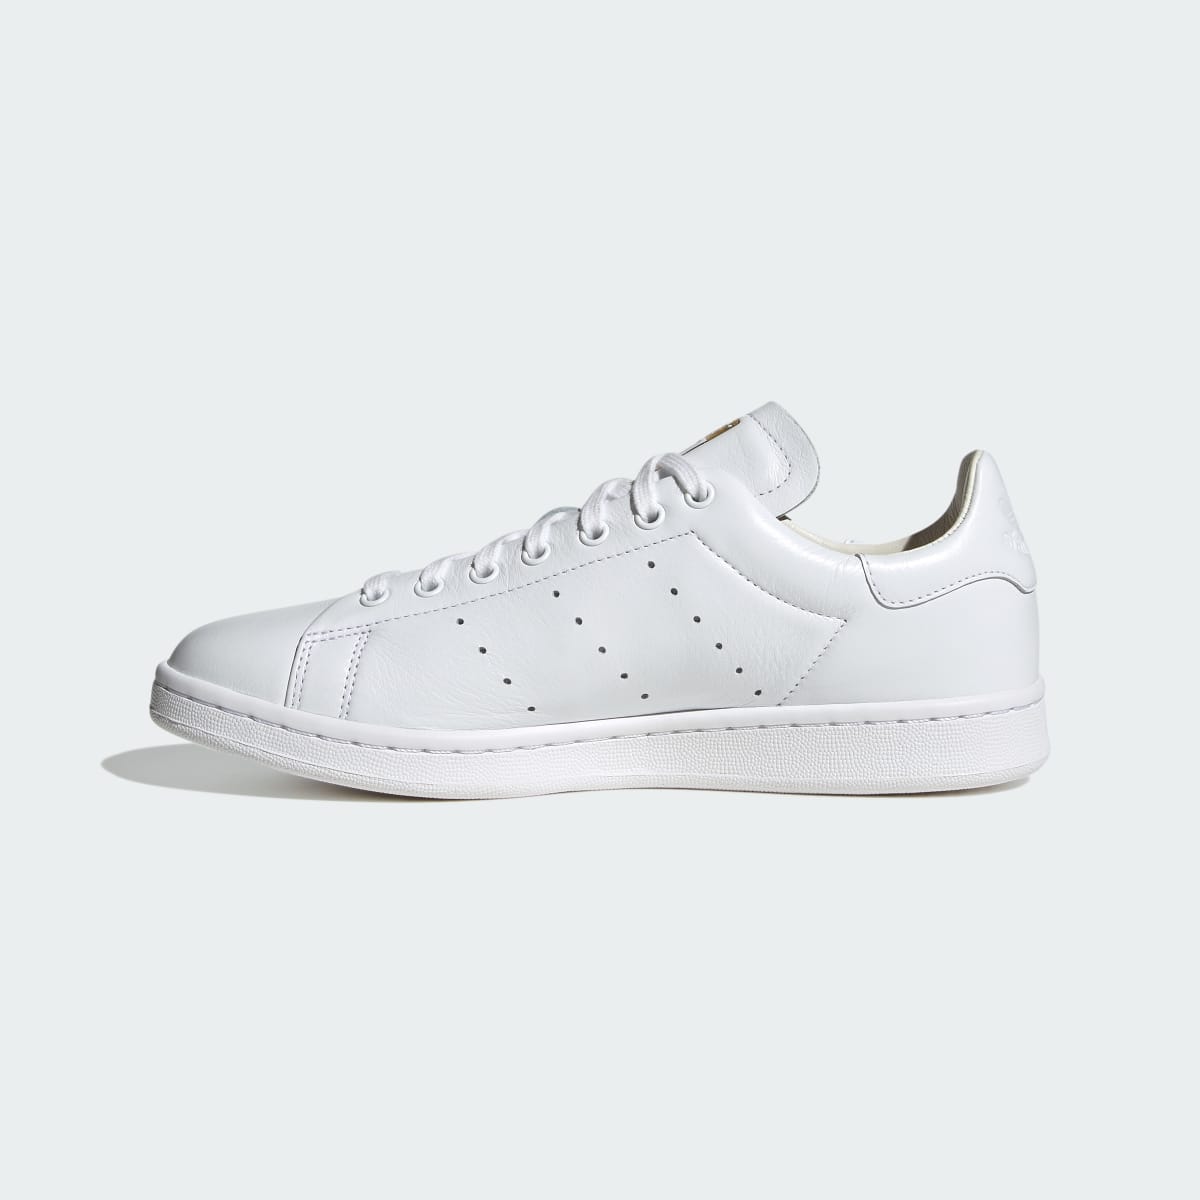 Adidas Stan Smith Lux Shoes. 8